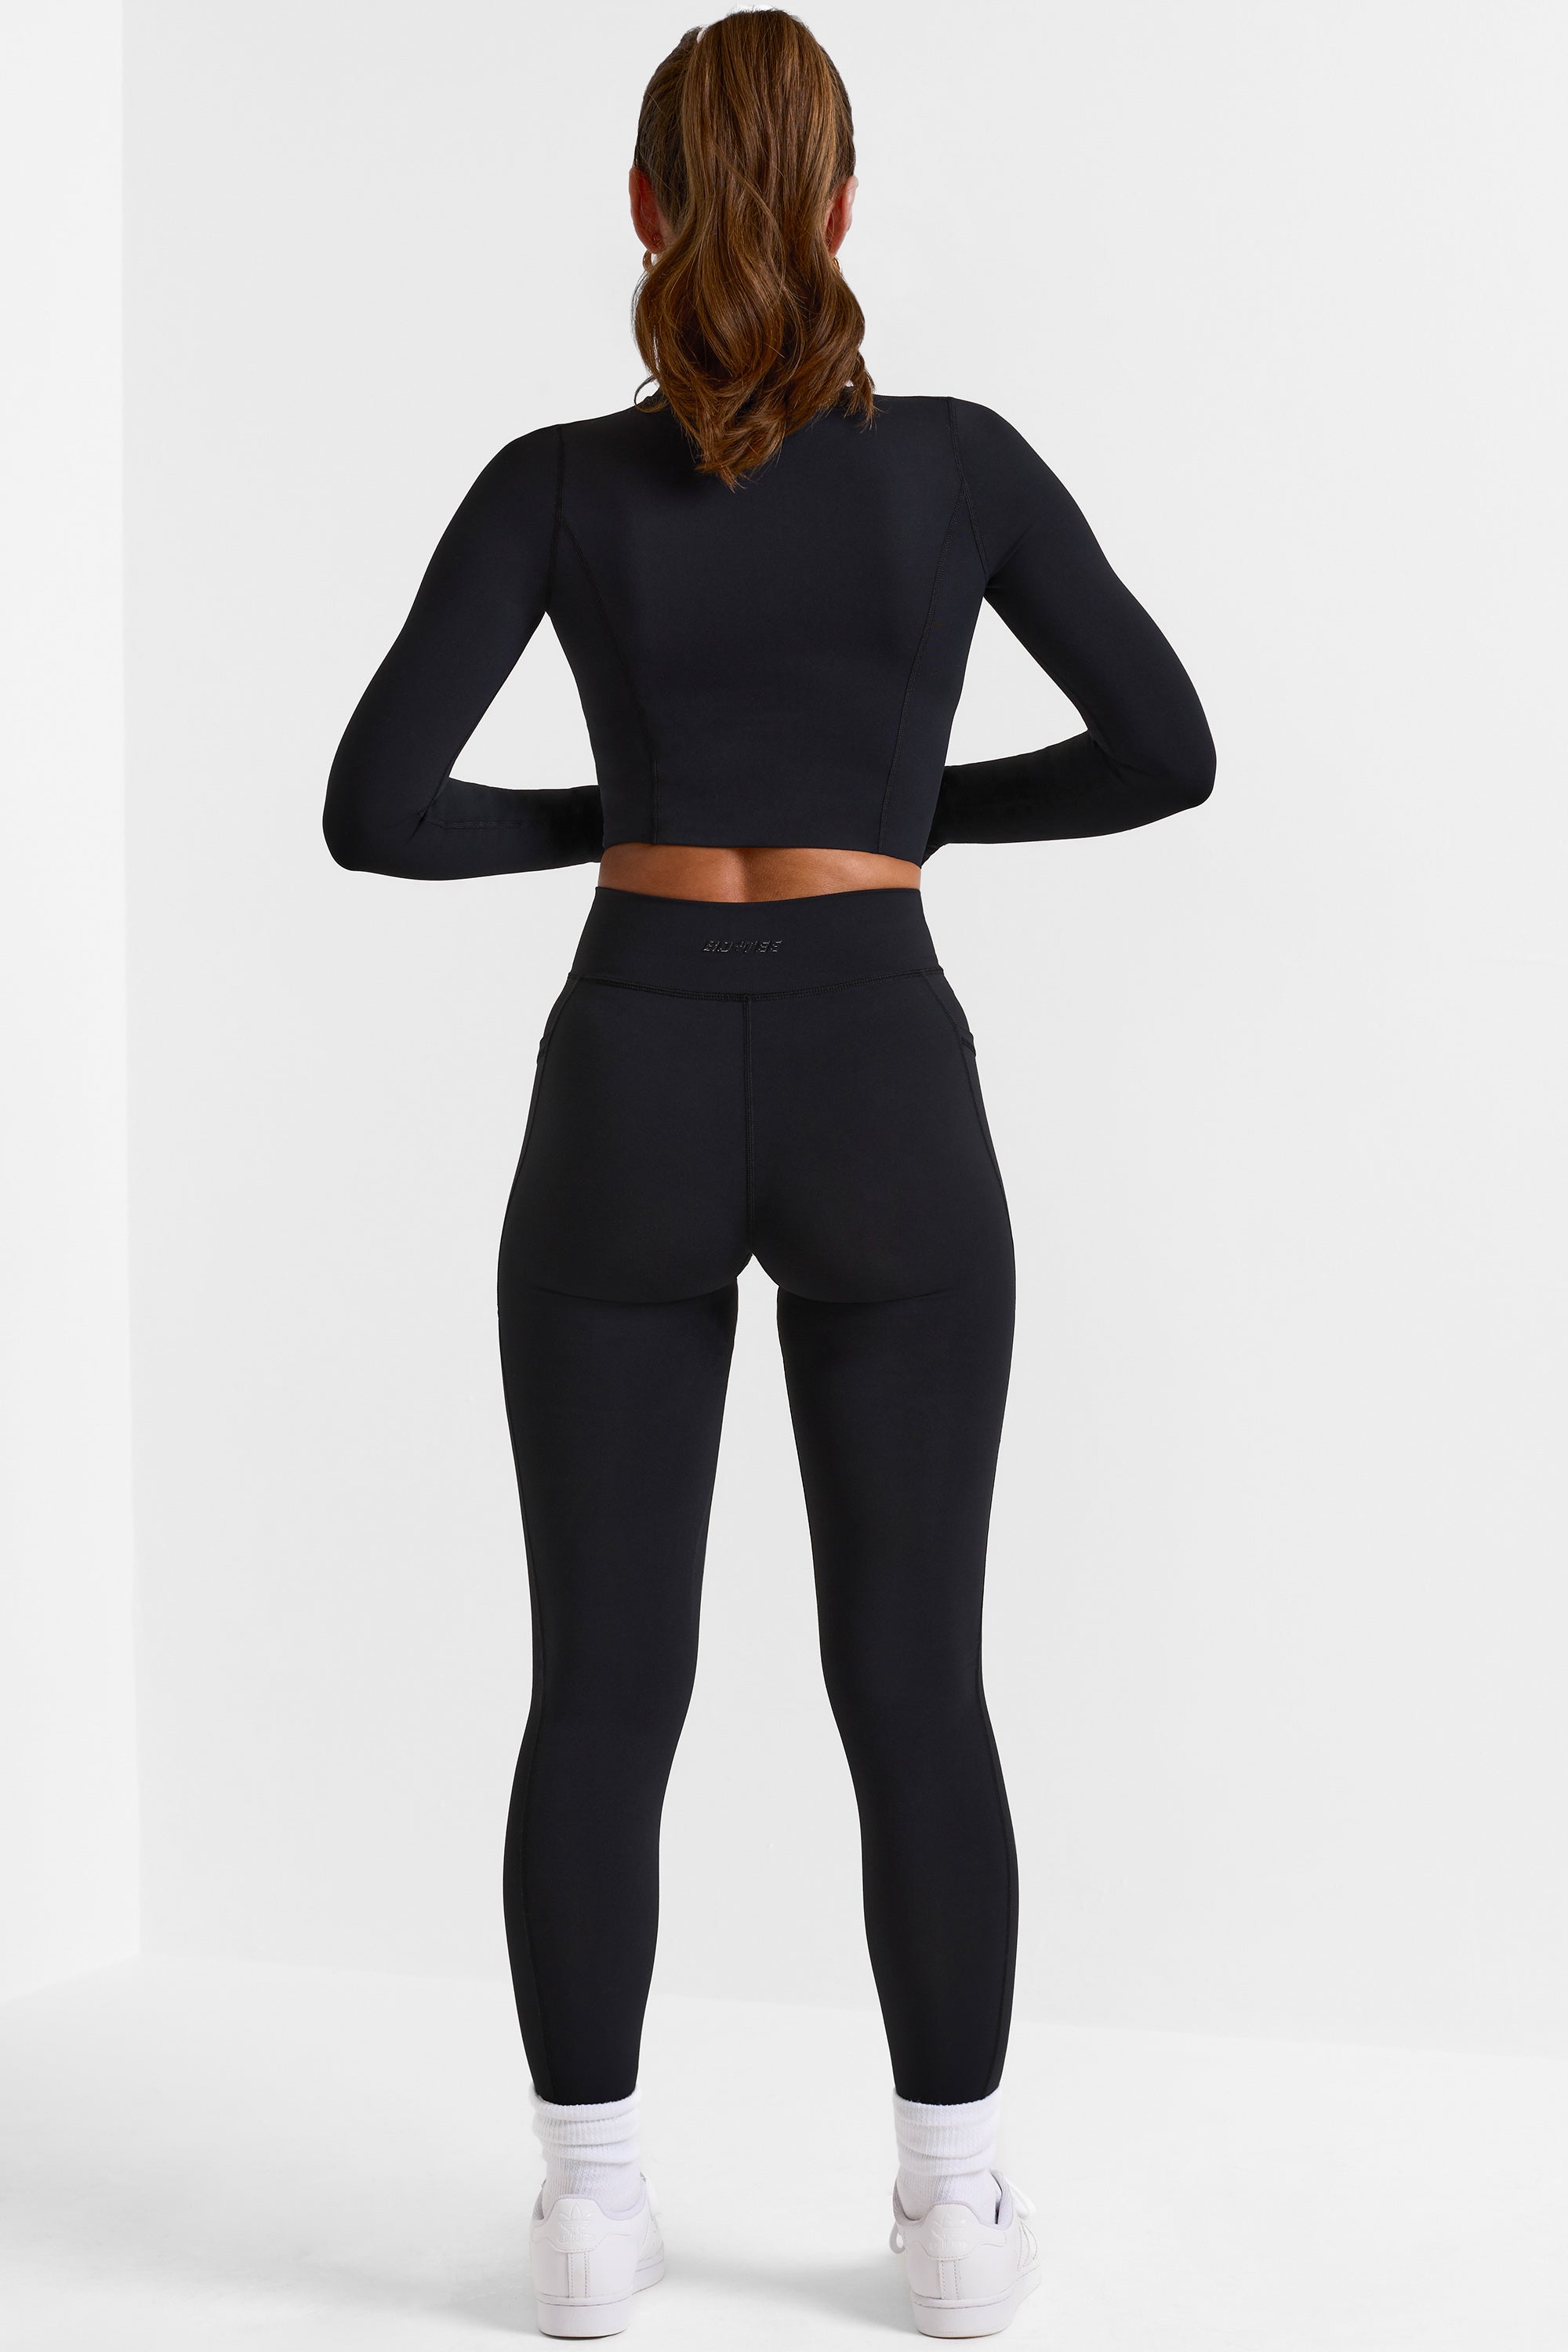 Boody Bamboo soft feel pocket Leggings - Free UK Delivery £50+